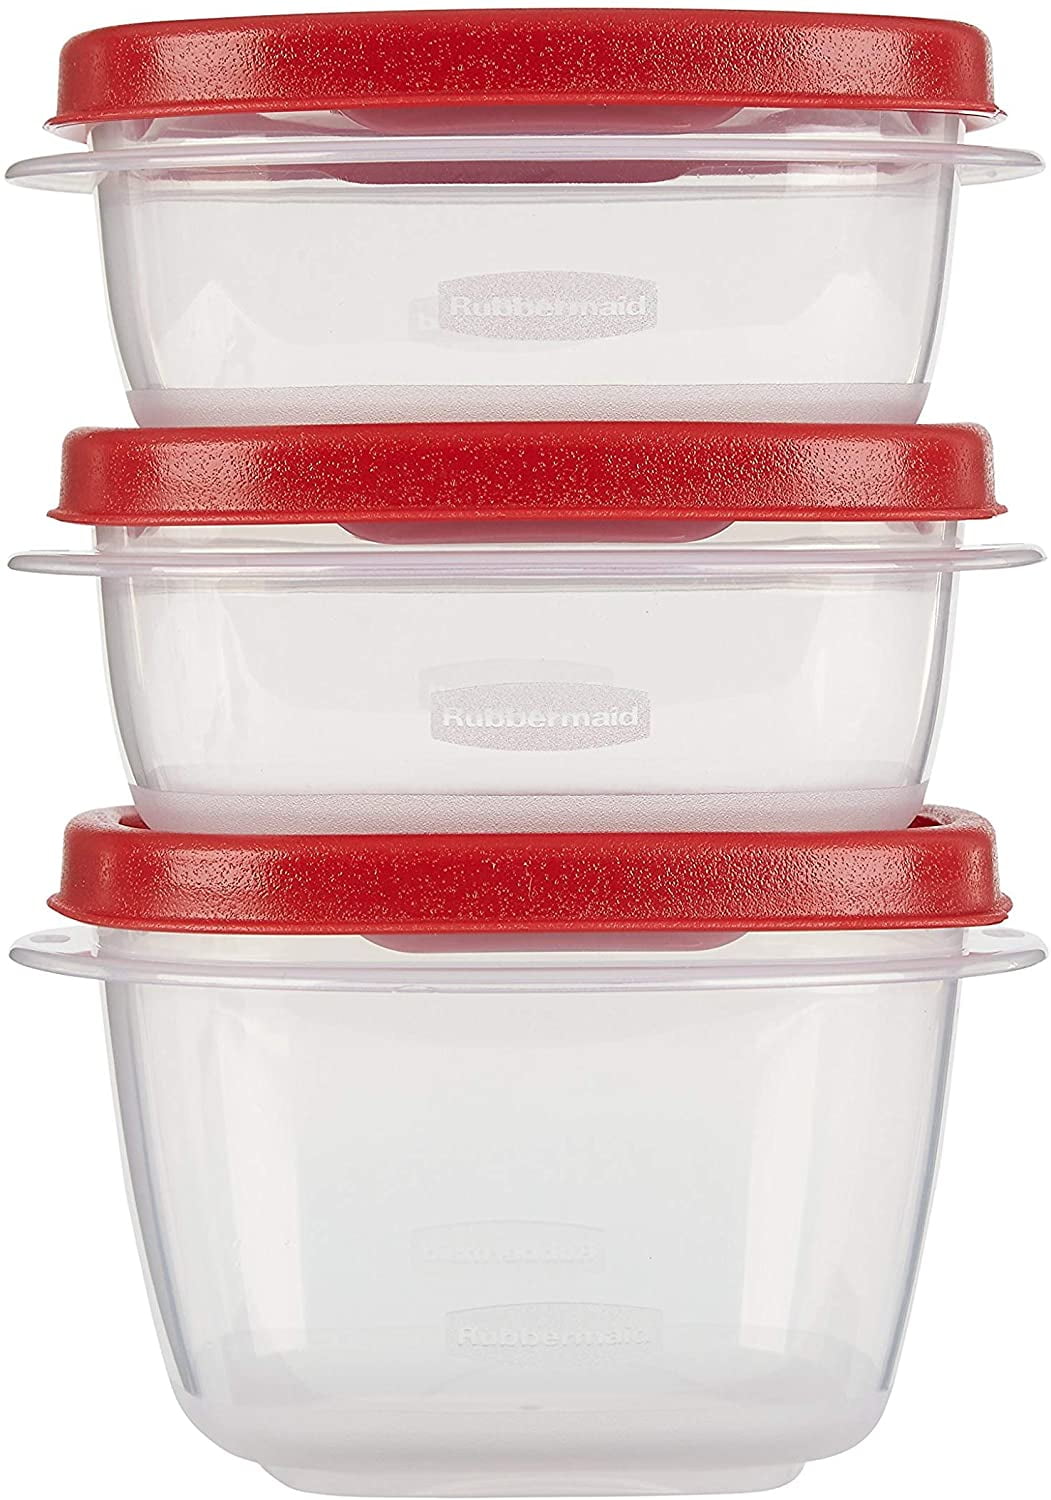 6 Rubbermaid Servin Saver Small Containers #0 1/2C, #A 1cup Lunch